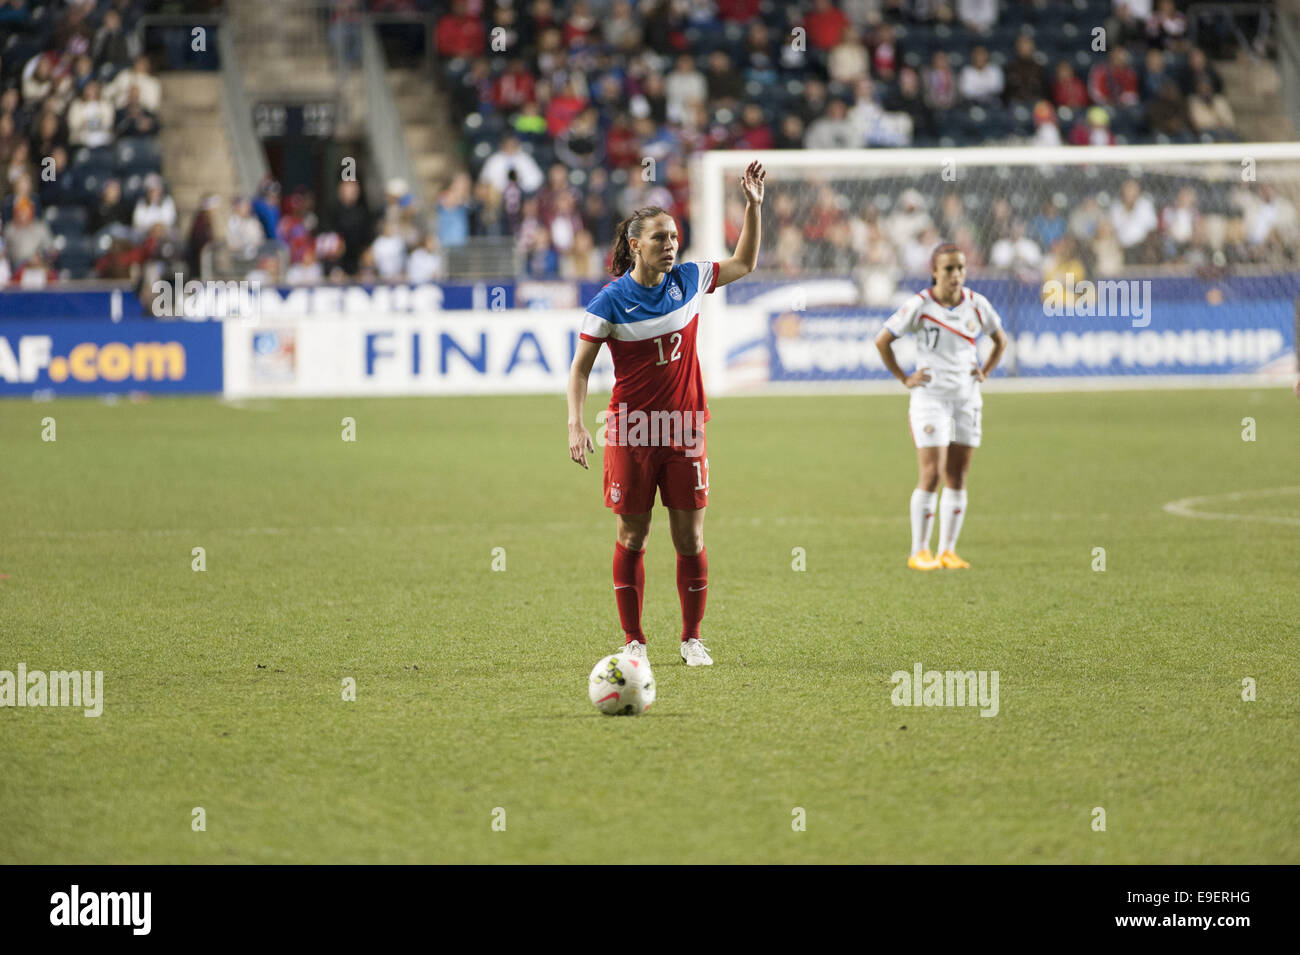 Chester, Pennsylvania, USA. 26th Oct, 2014. USA's LAUREN HOLIDAY(12) in action against Costa Rica during the CONCACAF 2014 championship match at PPL Park in Chester Pa. Credit:  Ricky Fitchett/ZUMA Wire/Alamy Live News Stock Photo